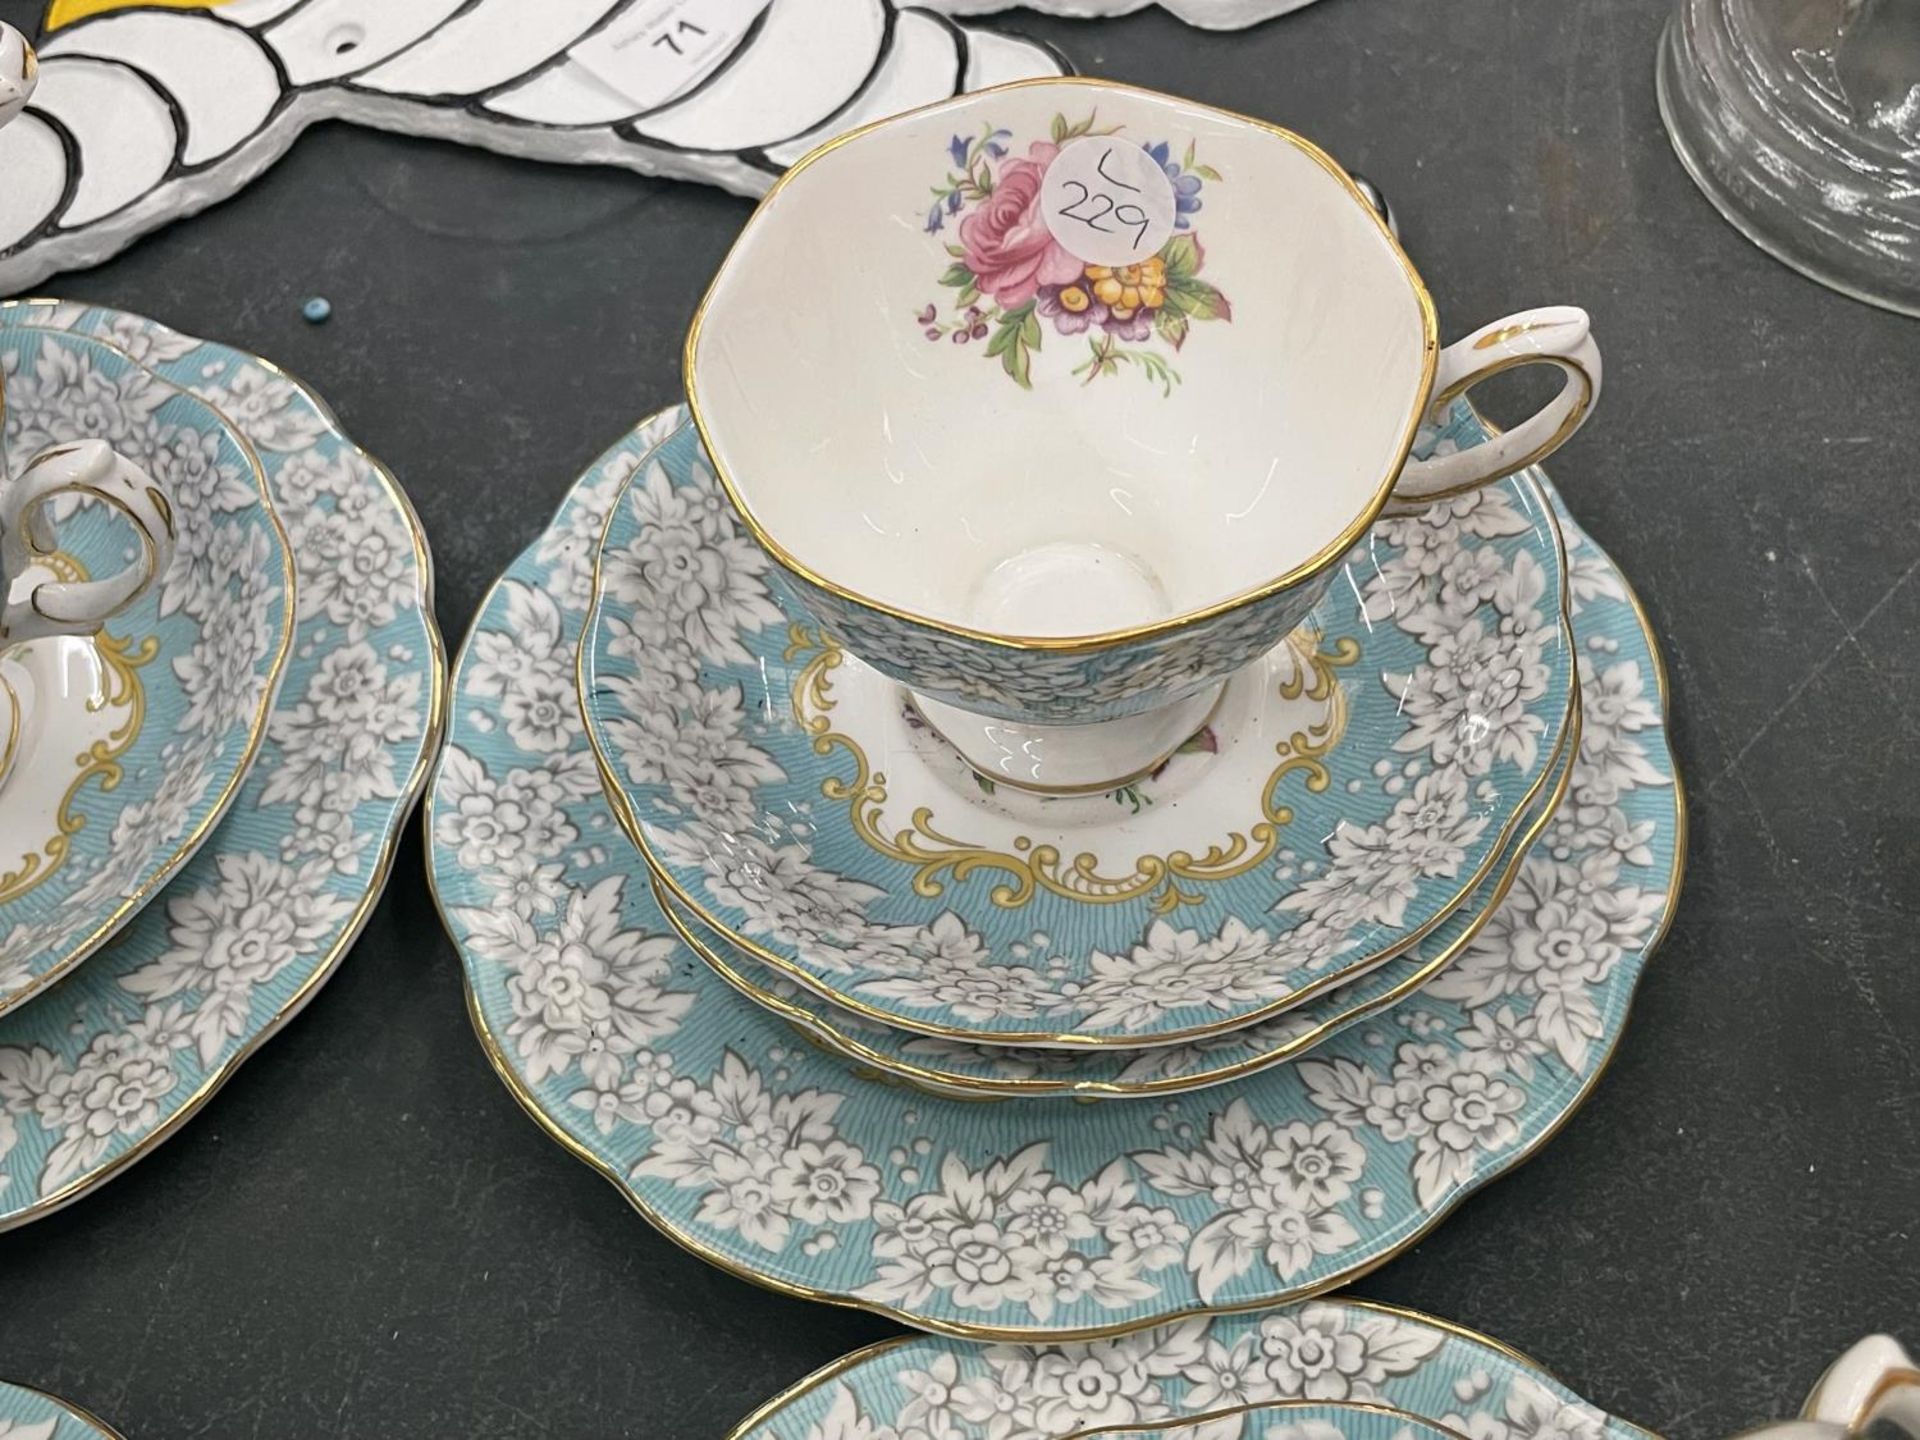 A QUANTITY OF ROYAL ALBERT 'ENCHANTMENT' CUPS, SAUCERS AND SIDE PLATES - Image 5 of 7